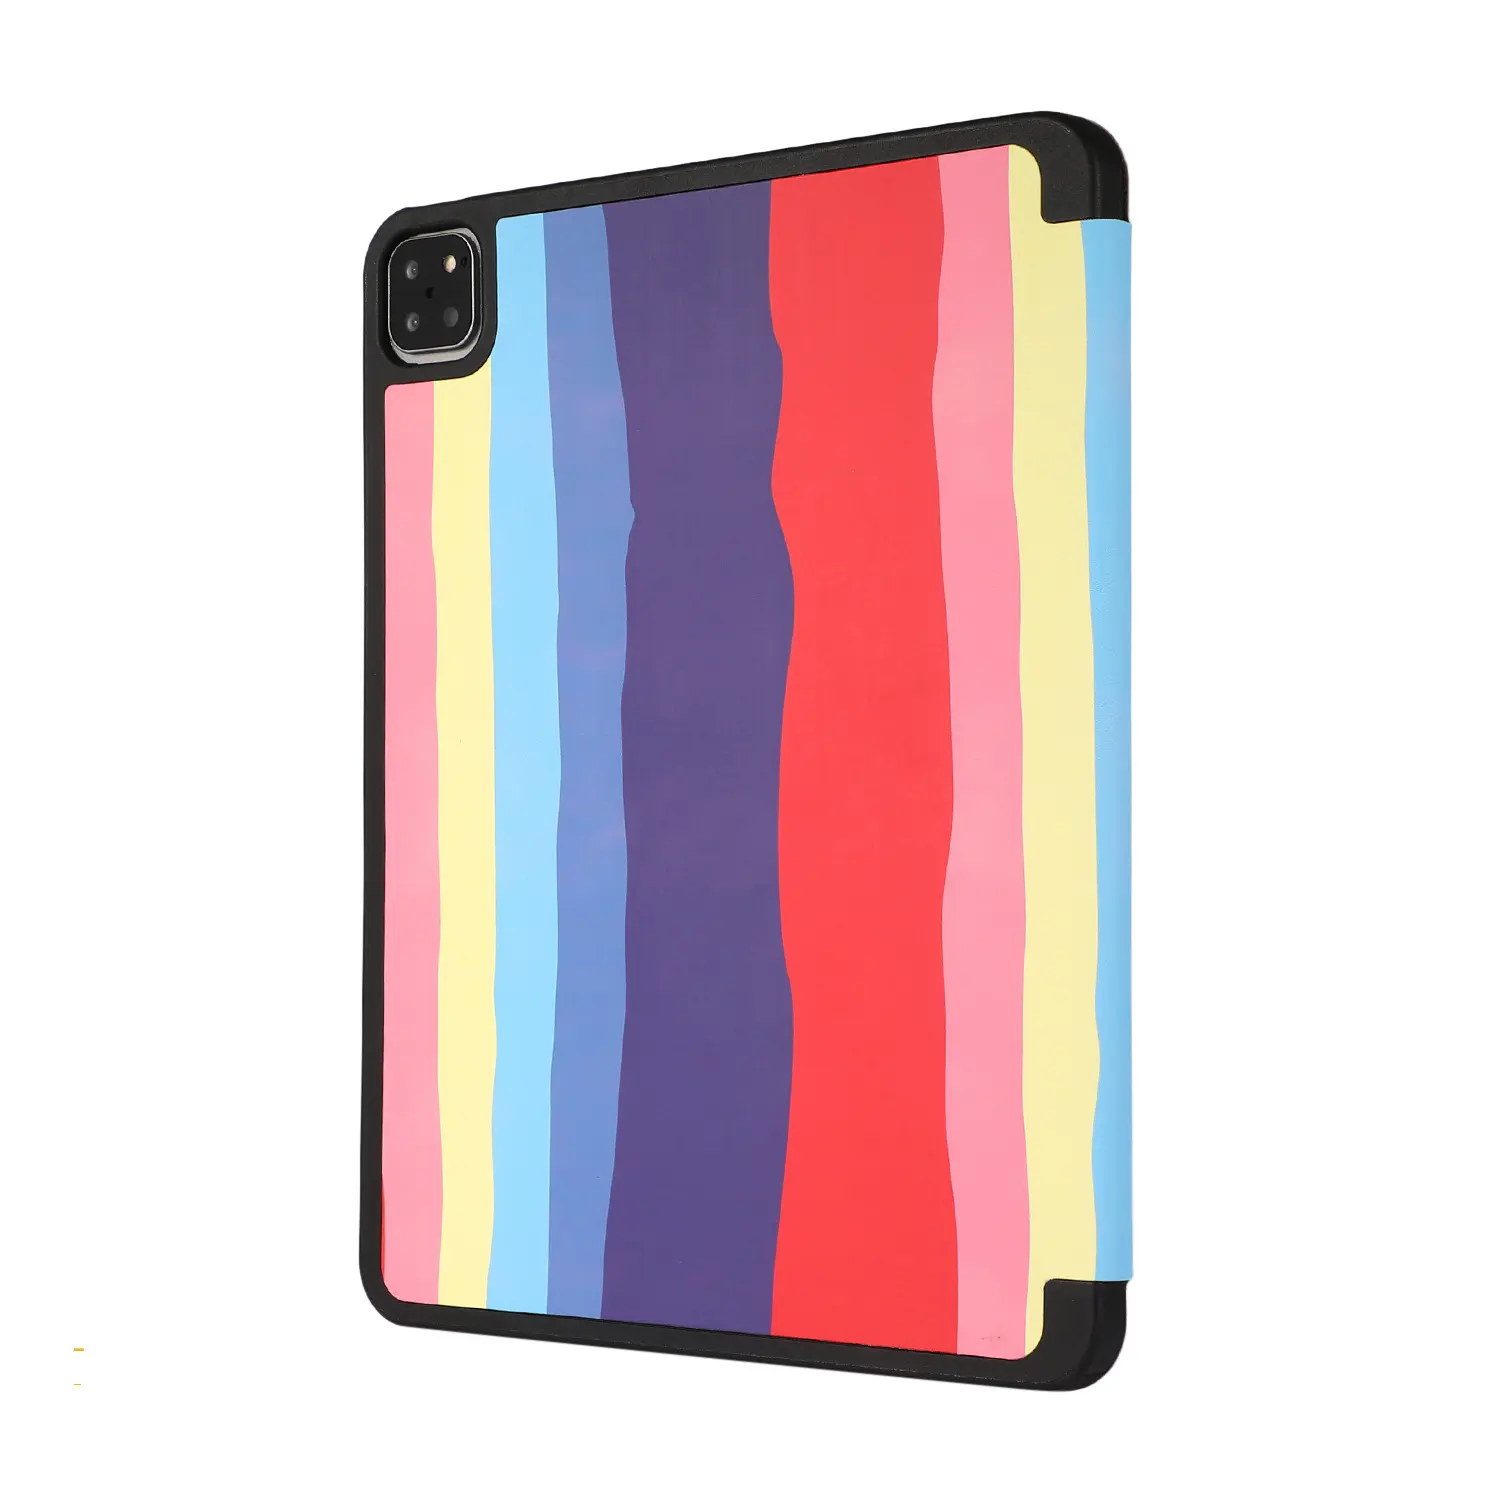 With Pencil Holder Rainbow Stripe PU Leather Flip Case Cover For iPad 9.7 Tablet Case For iPad Air 4 10.2 Mini 4 5 Pro 11 2021